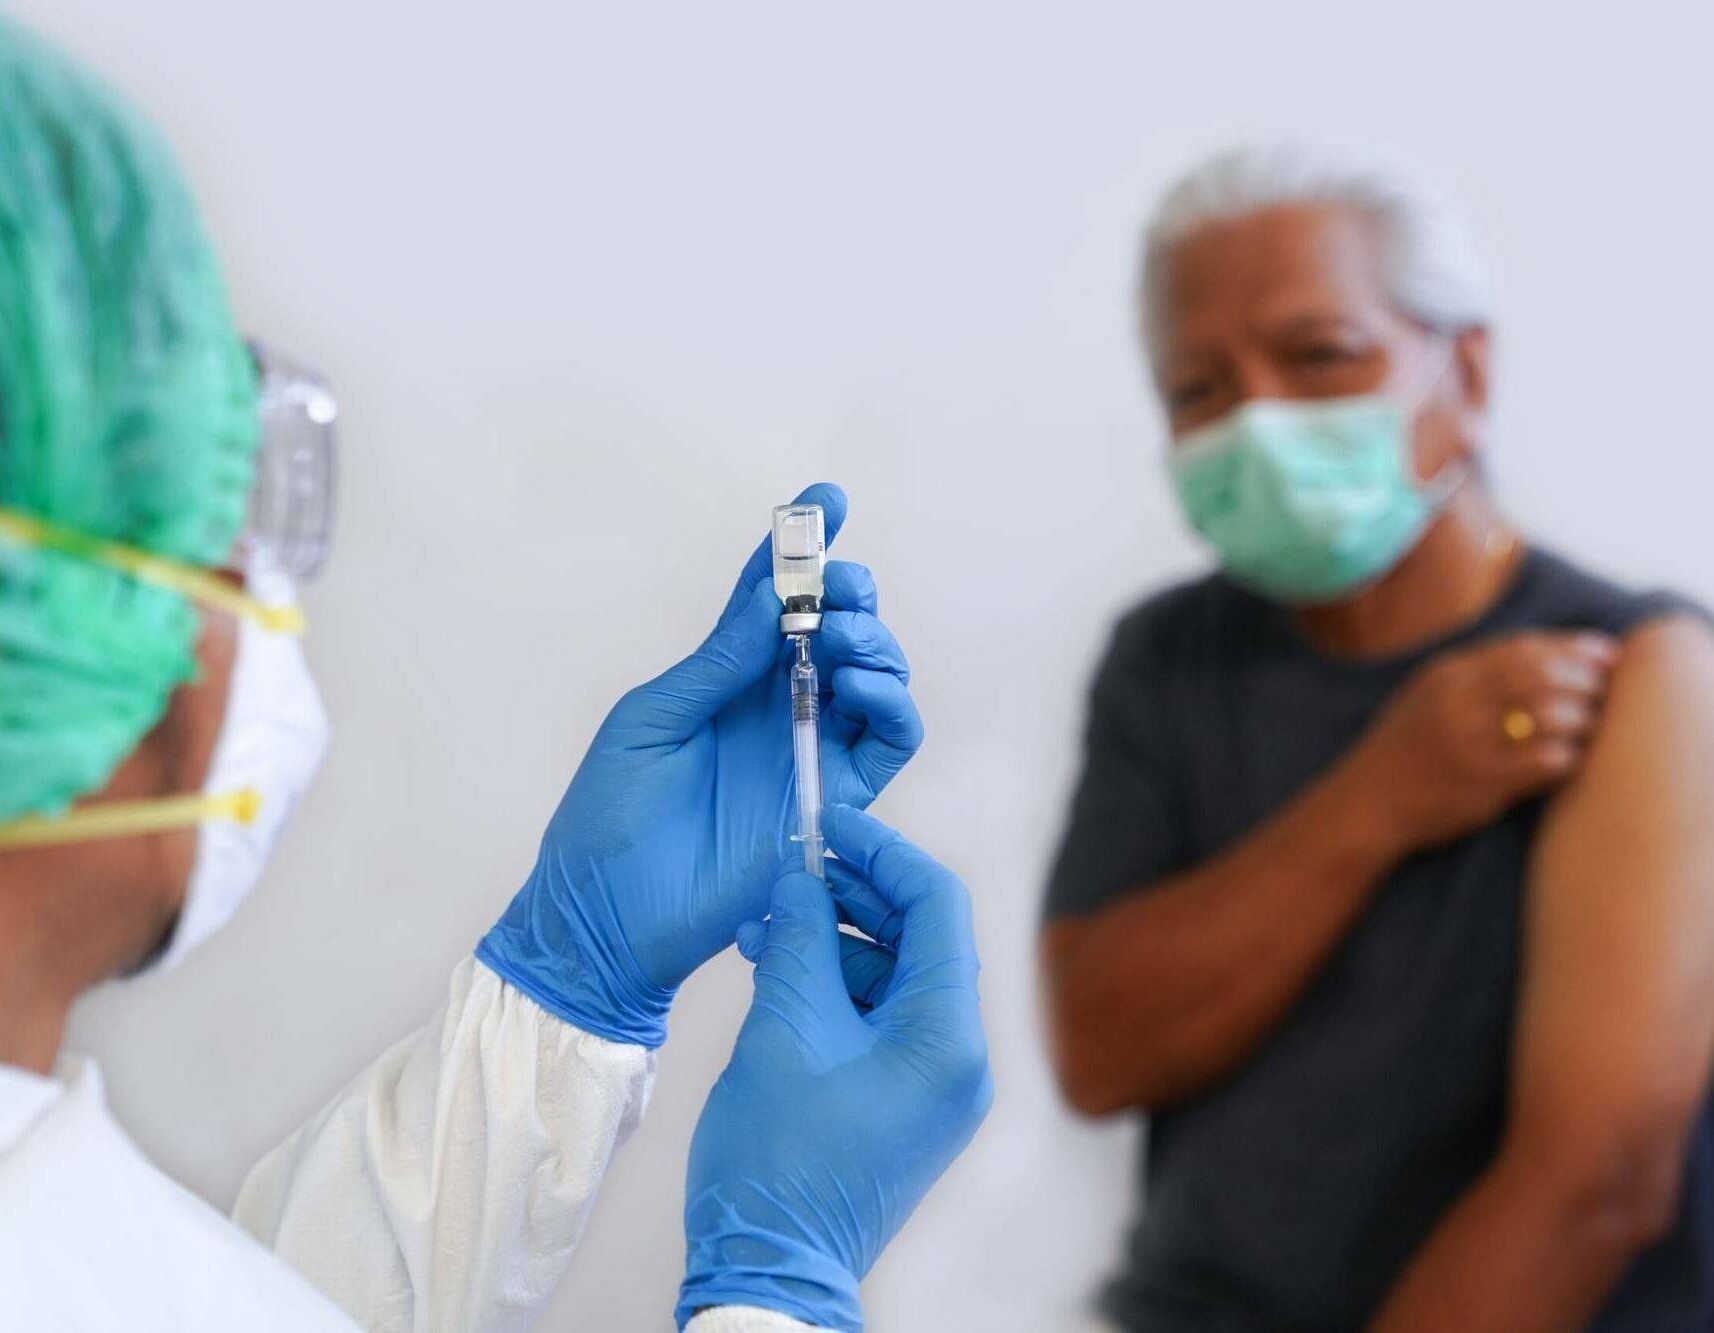 Photograph of a medical worker preparing a COVID vaccination shot for an older man who is wearing a mask and pulling up his shirt sleeve, Black doctors, COVID vaccine, Rewire